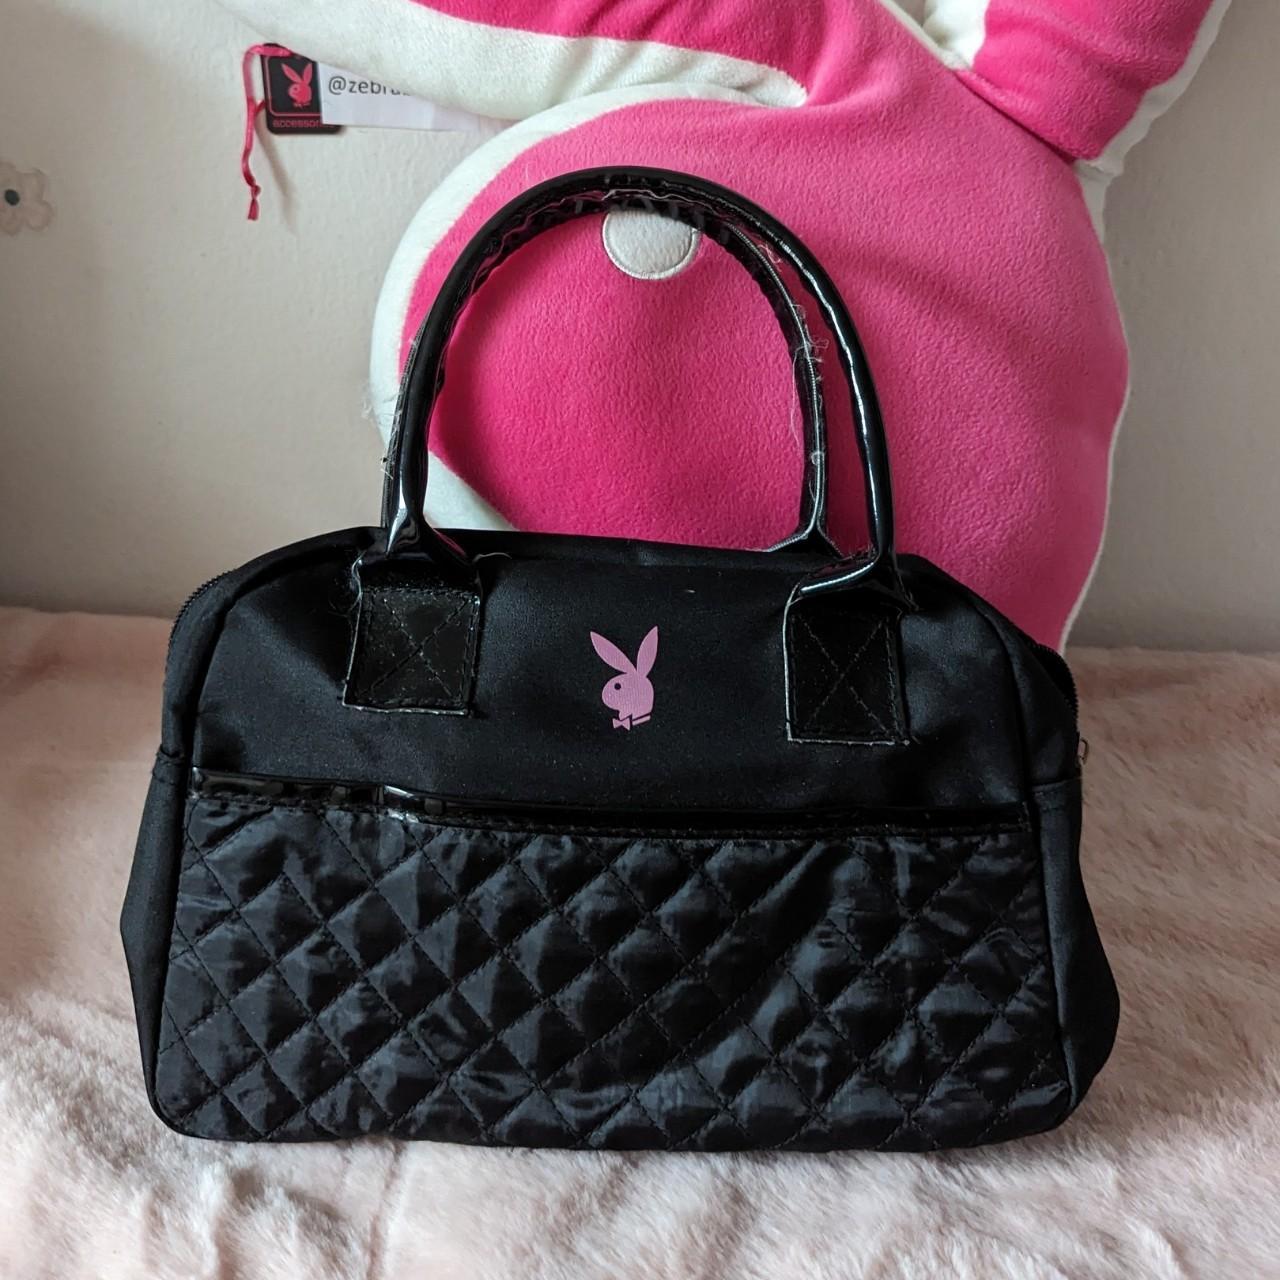 Absolutely ICONIC 2007 Playboy purse🐰 I've been - Depop